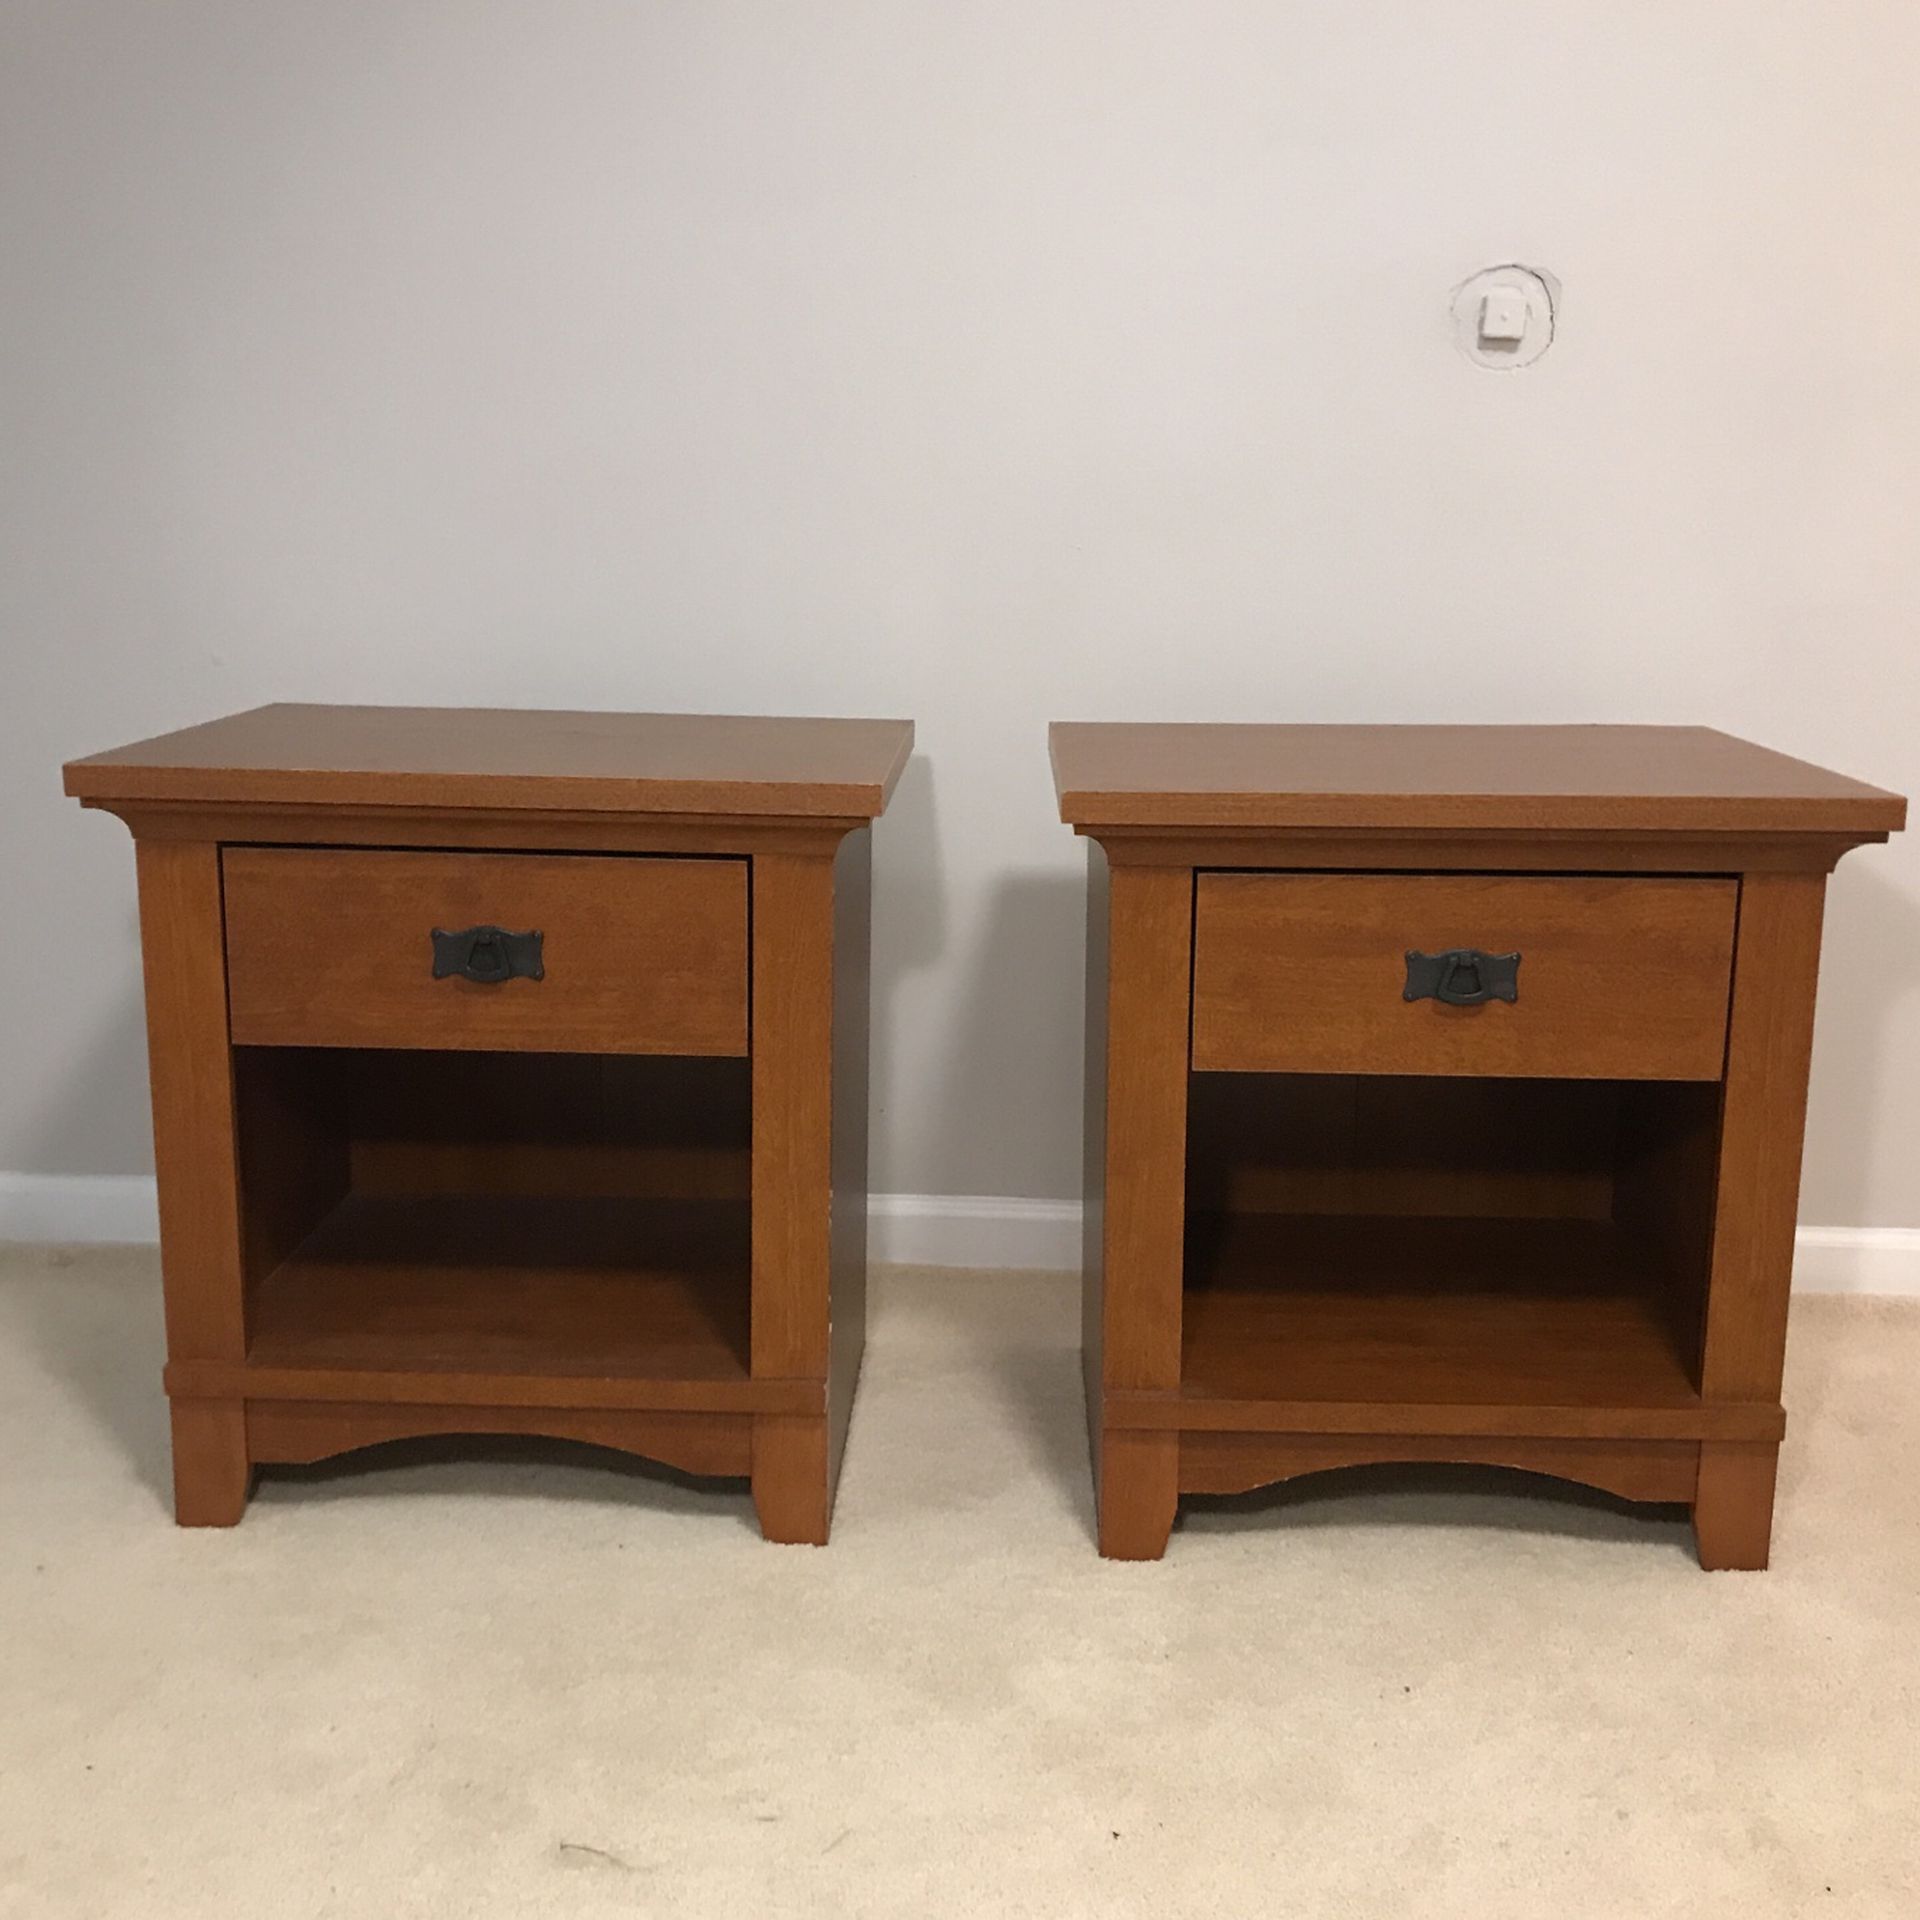 Two Red Wood Craftsman Style End Tables